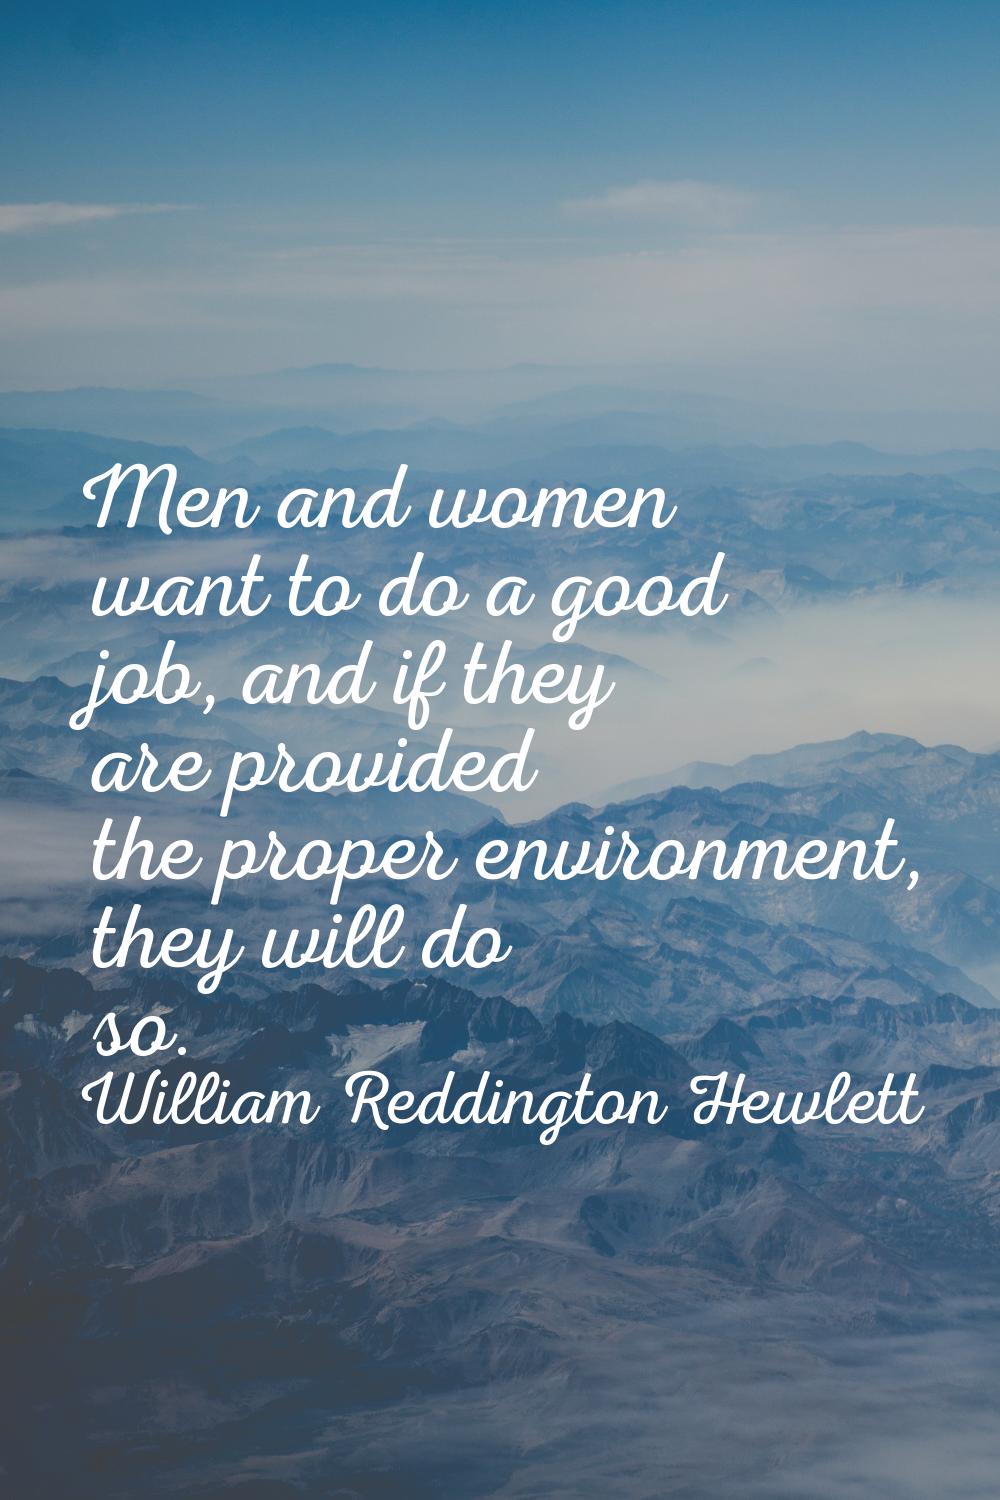 Men and women want to do a good job, and if they are provided the proper environment, they will do 